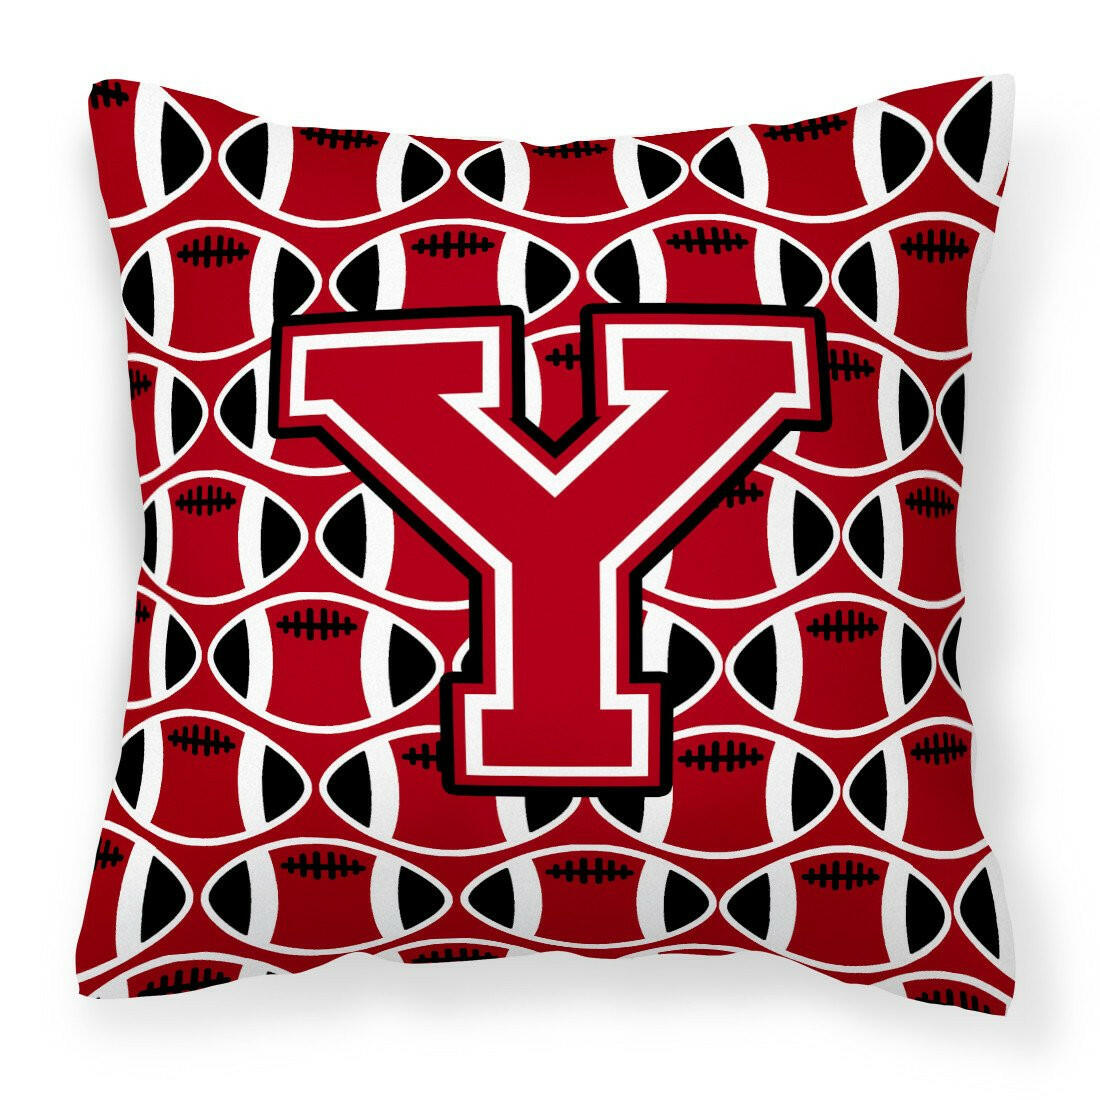 Letter Y Football Red, Black and White Fabric Decorative Pillow CJ1073-YPW1414 by Caroline's Treasures